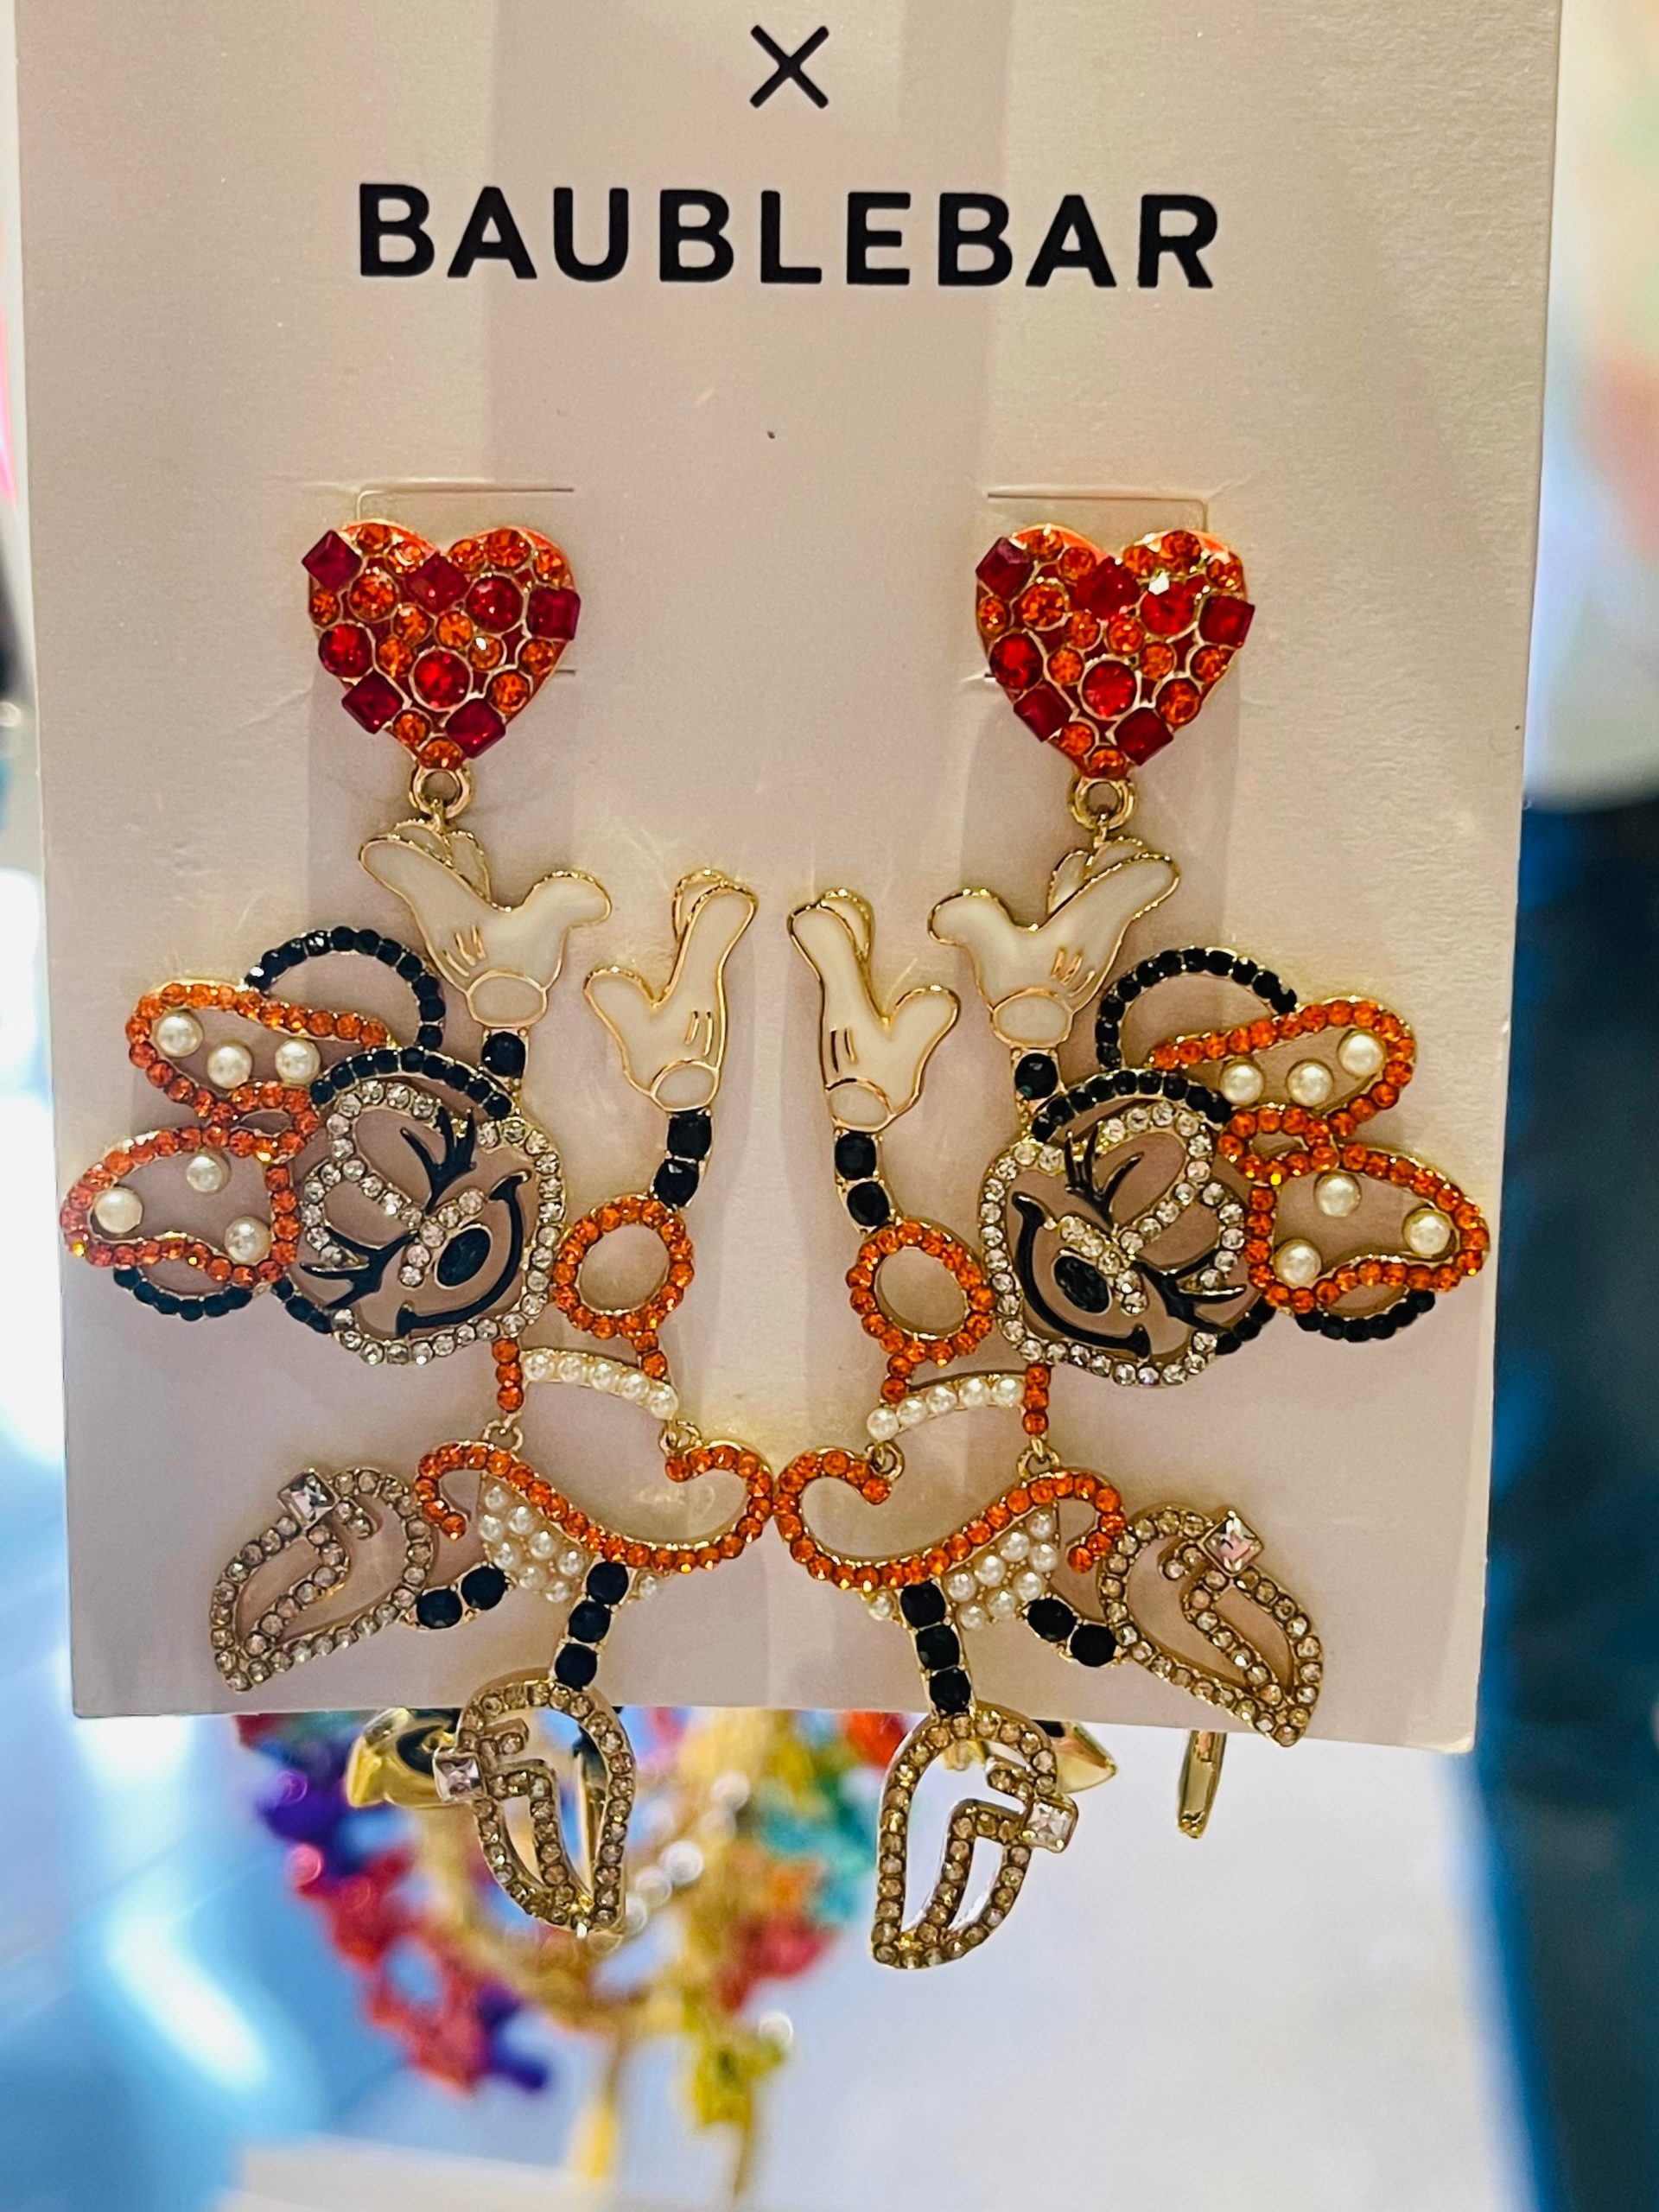 Add Some Dazzle To Valentine's Day With These BaubleBar Earrings 